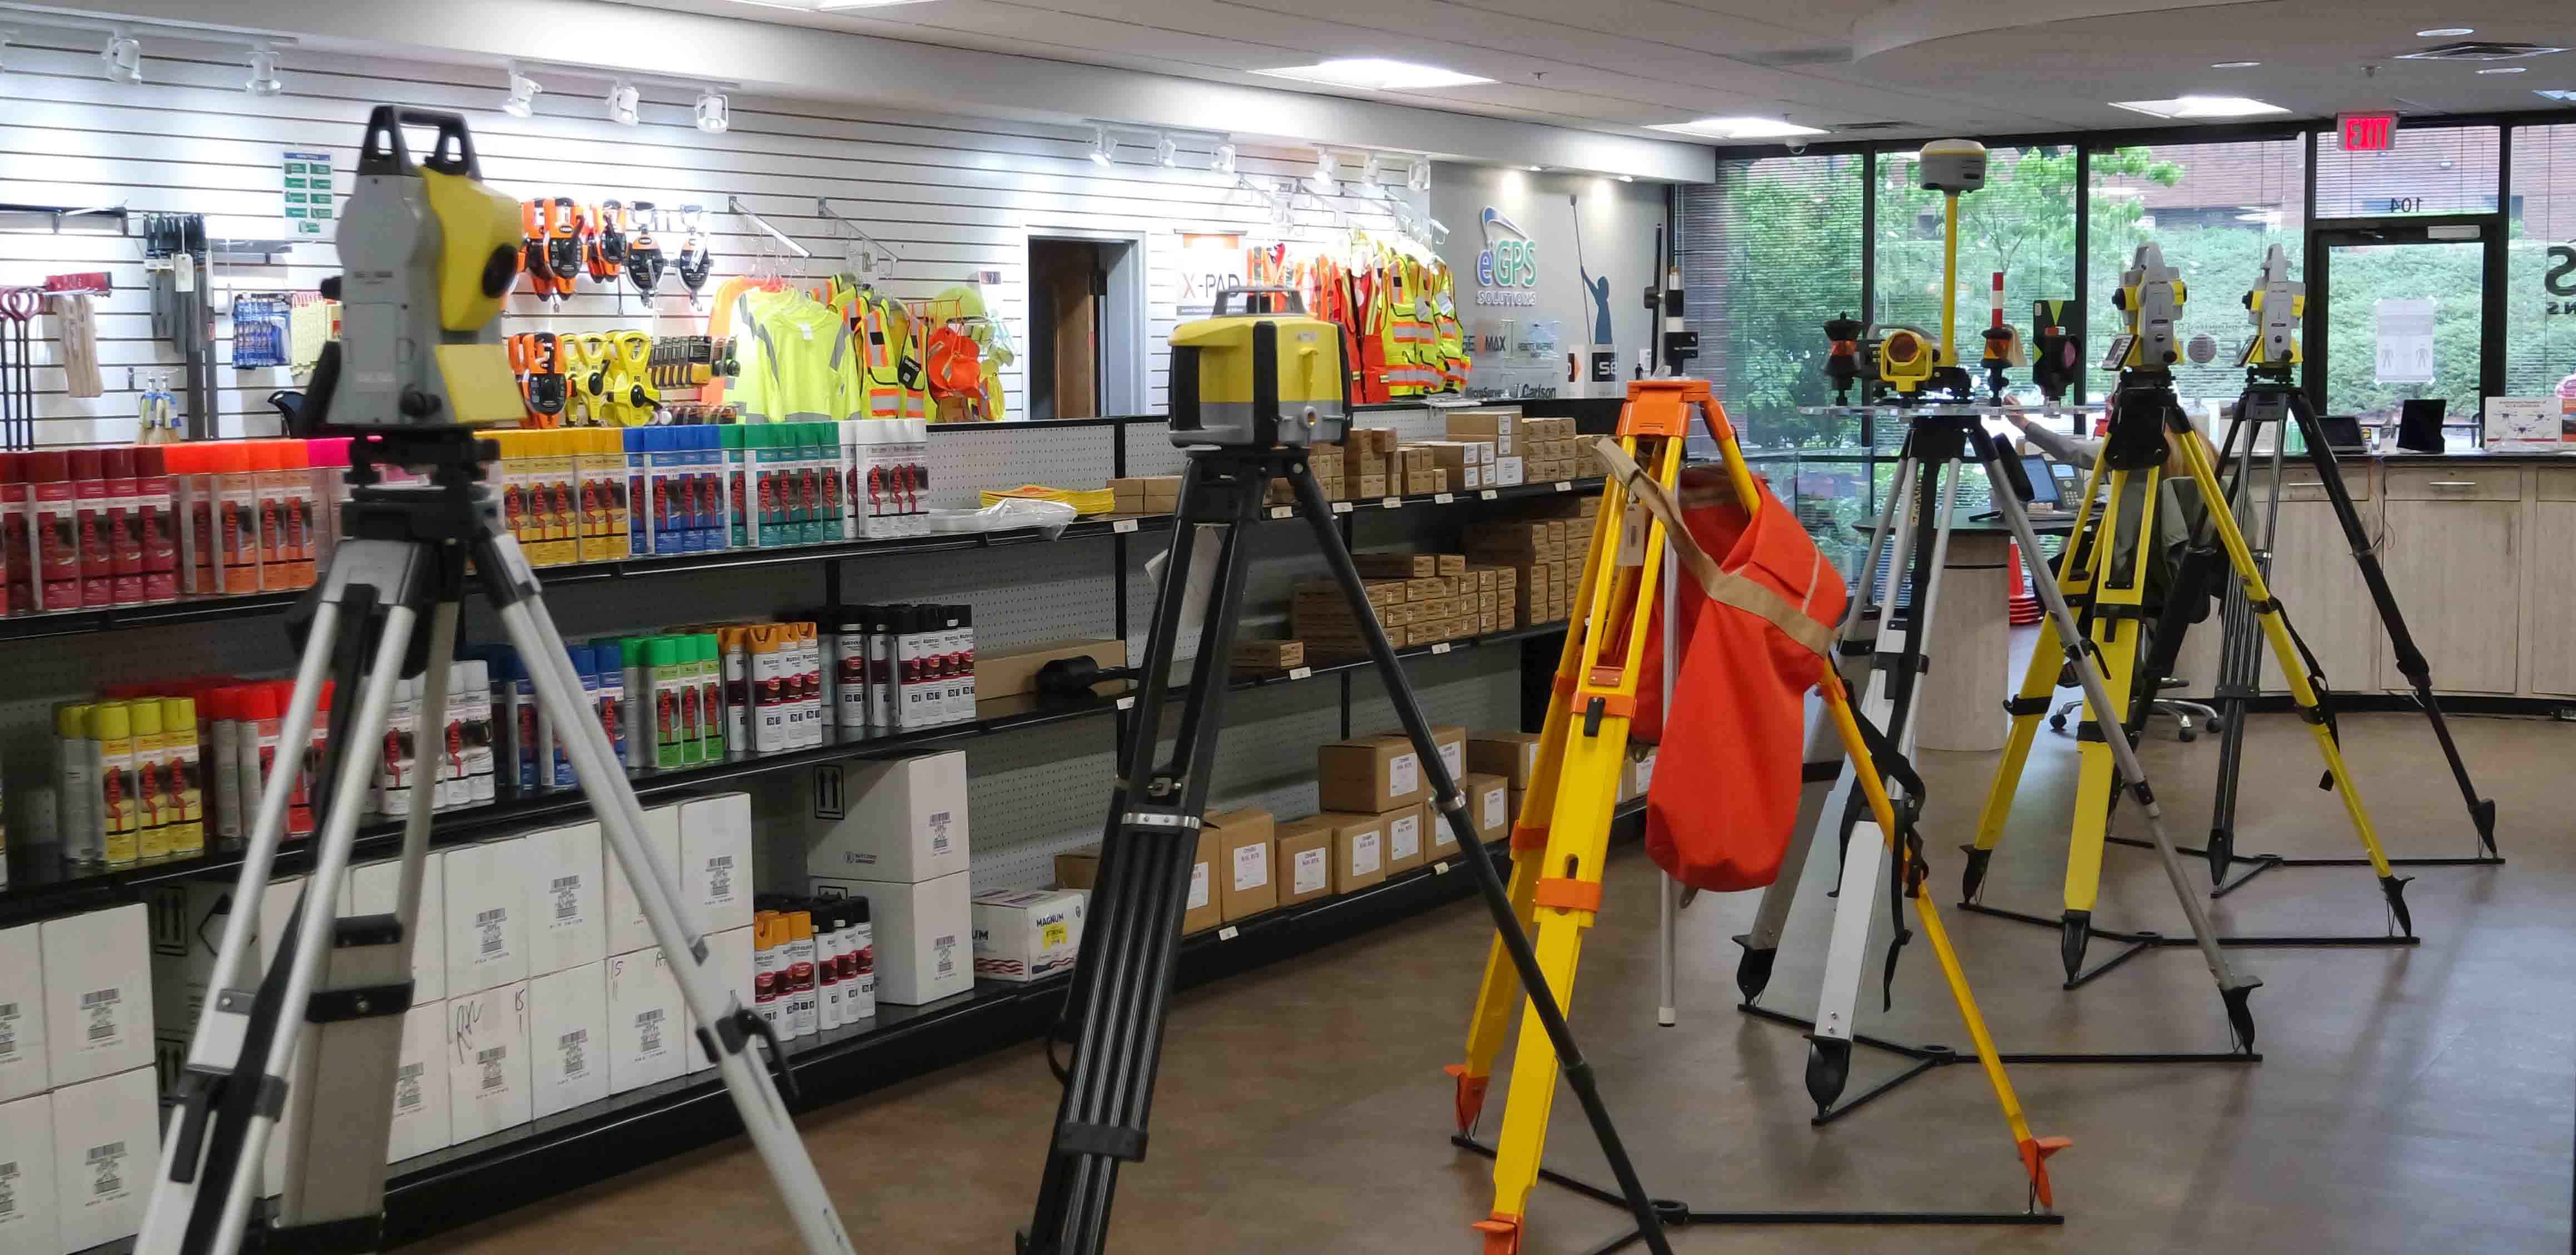 egps solutions showroom with surveying equipment and supplies on display